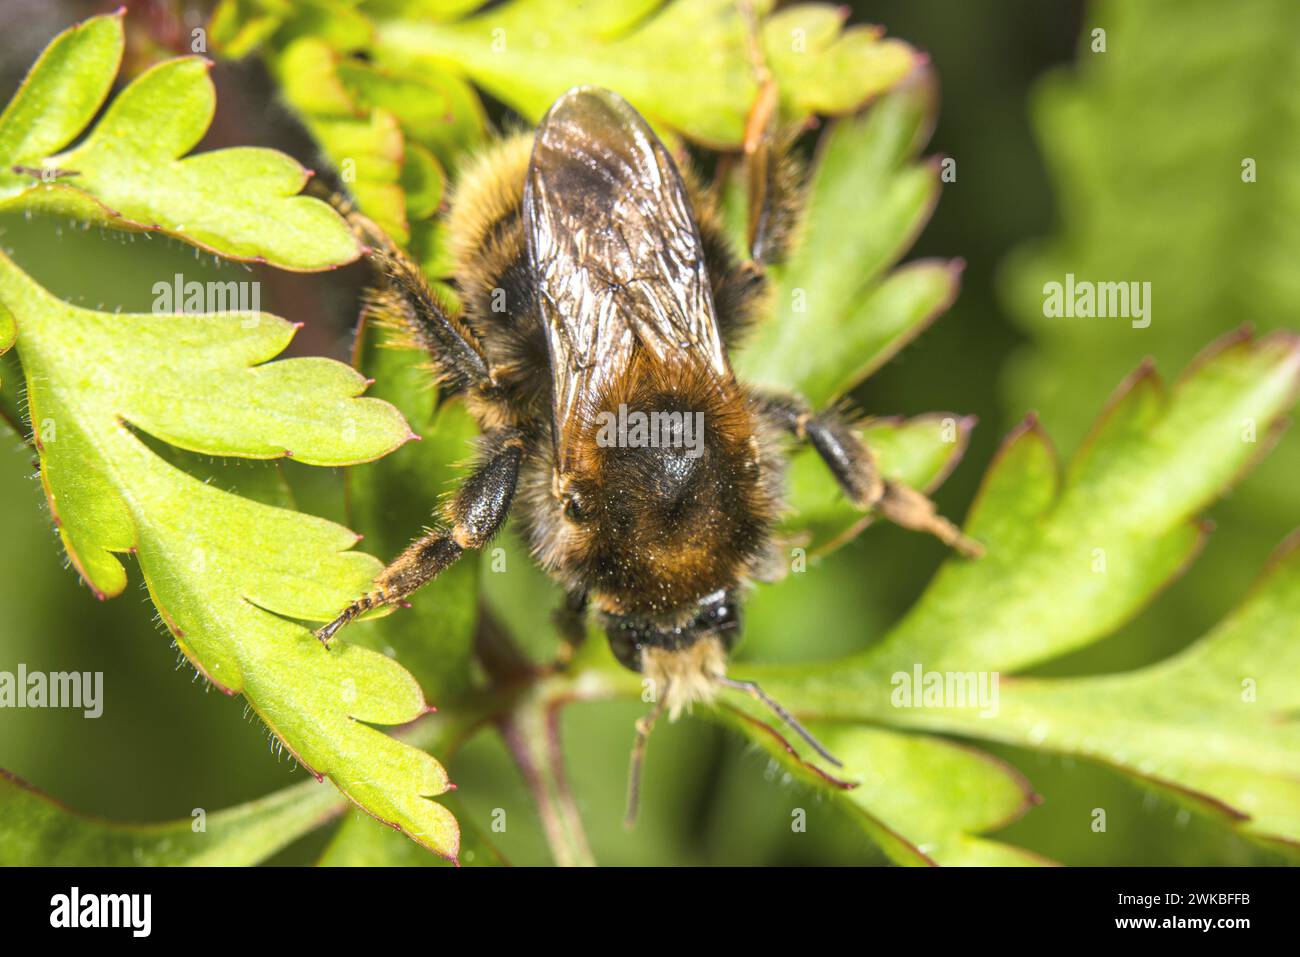 brown-banded carder bee (Bombus humilis), sitting on a leaf, Germany Stock Photo